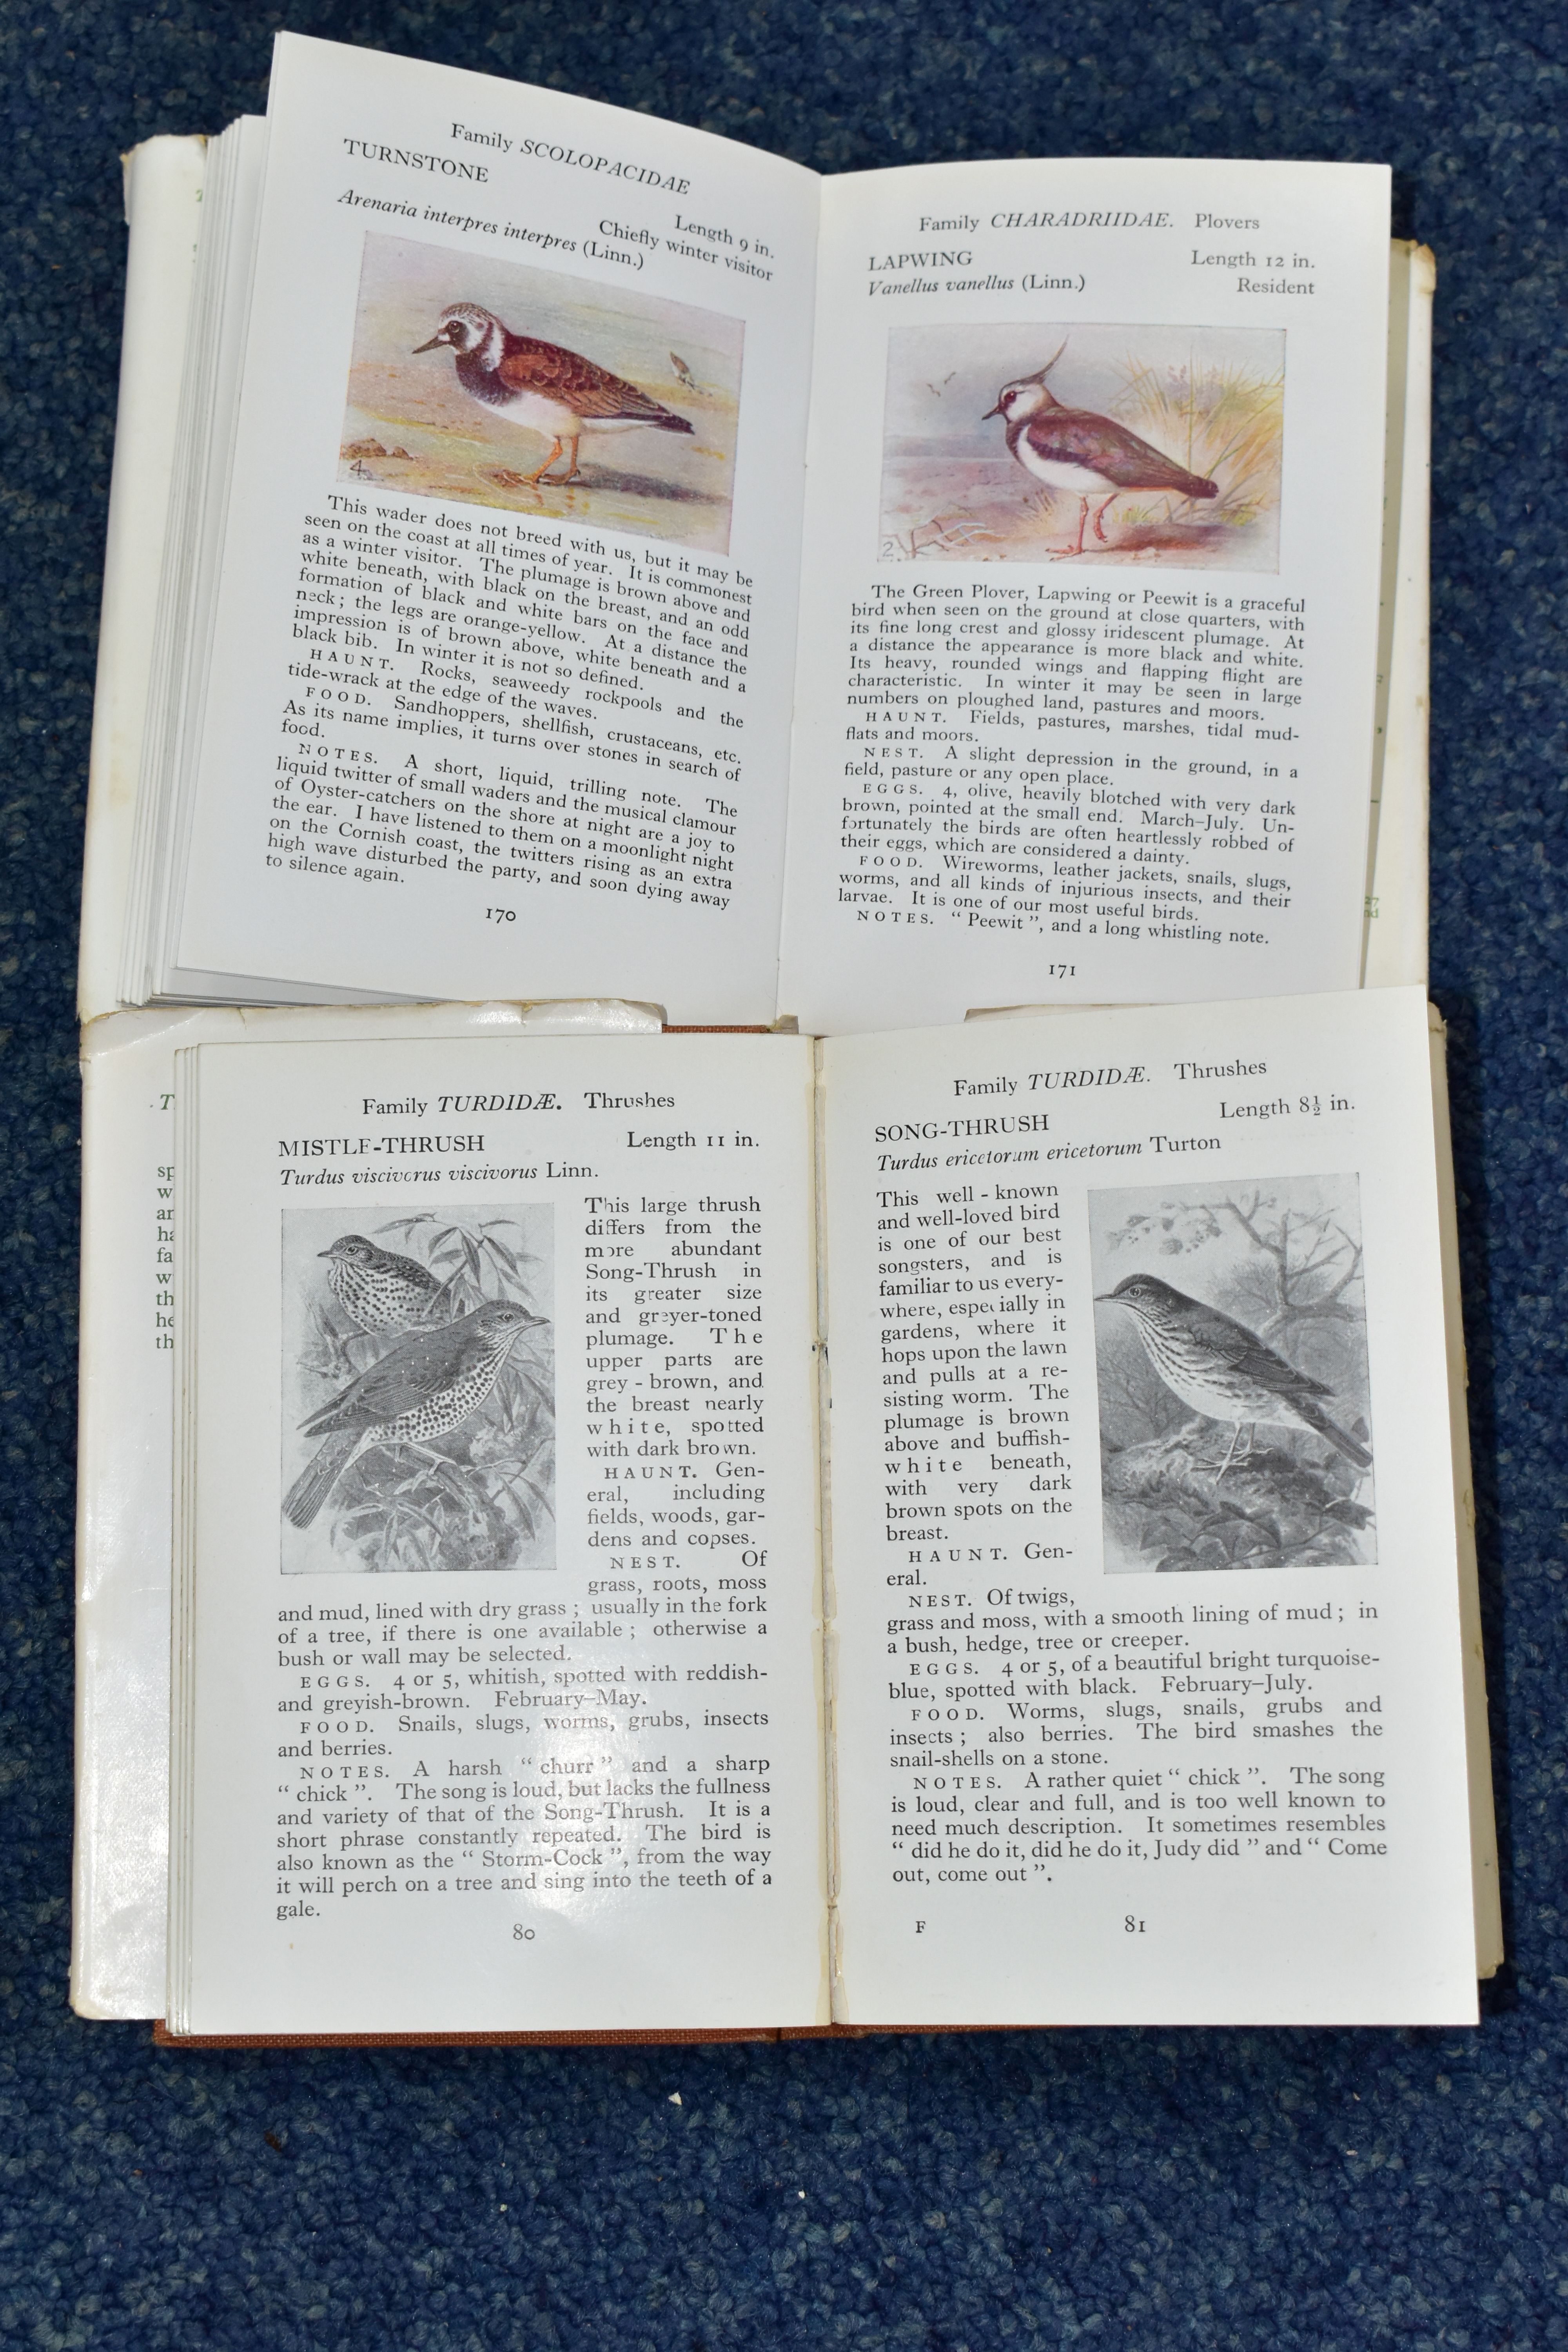 THE OBSERVER BOOK OF BRITISH BIRDS, by S. Vere Benson with a foreword by The Rt. Ho. Frances - Image 7 of 7